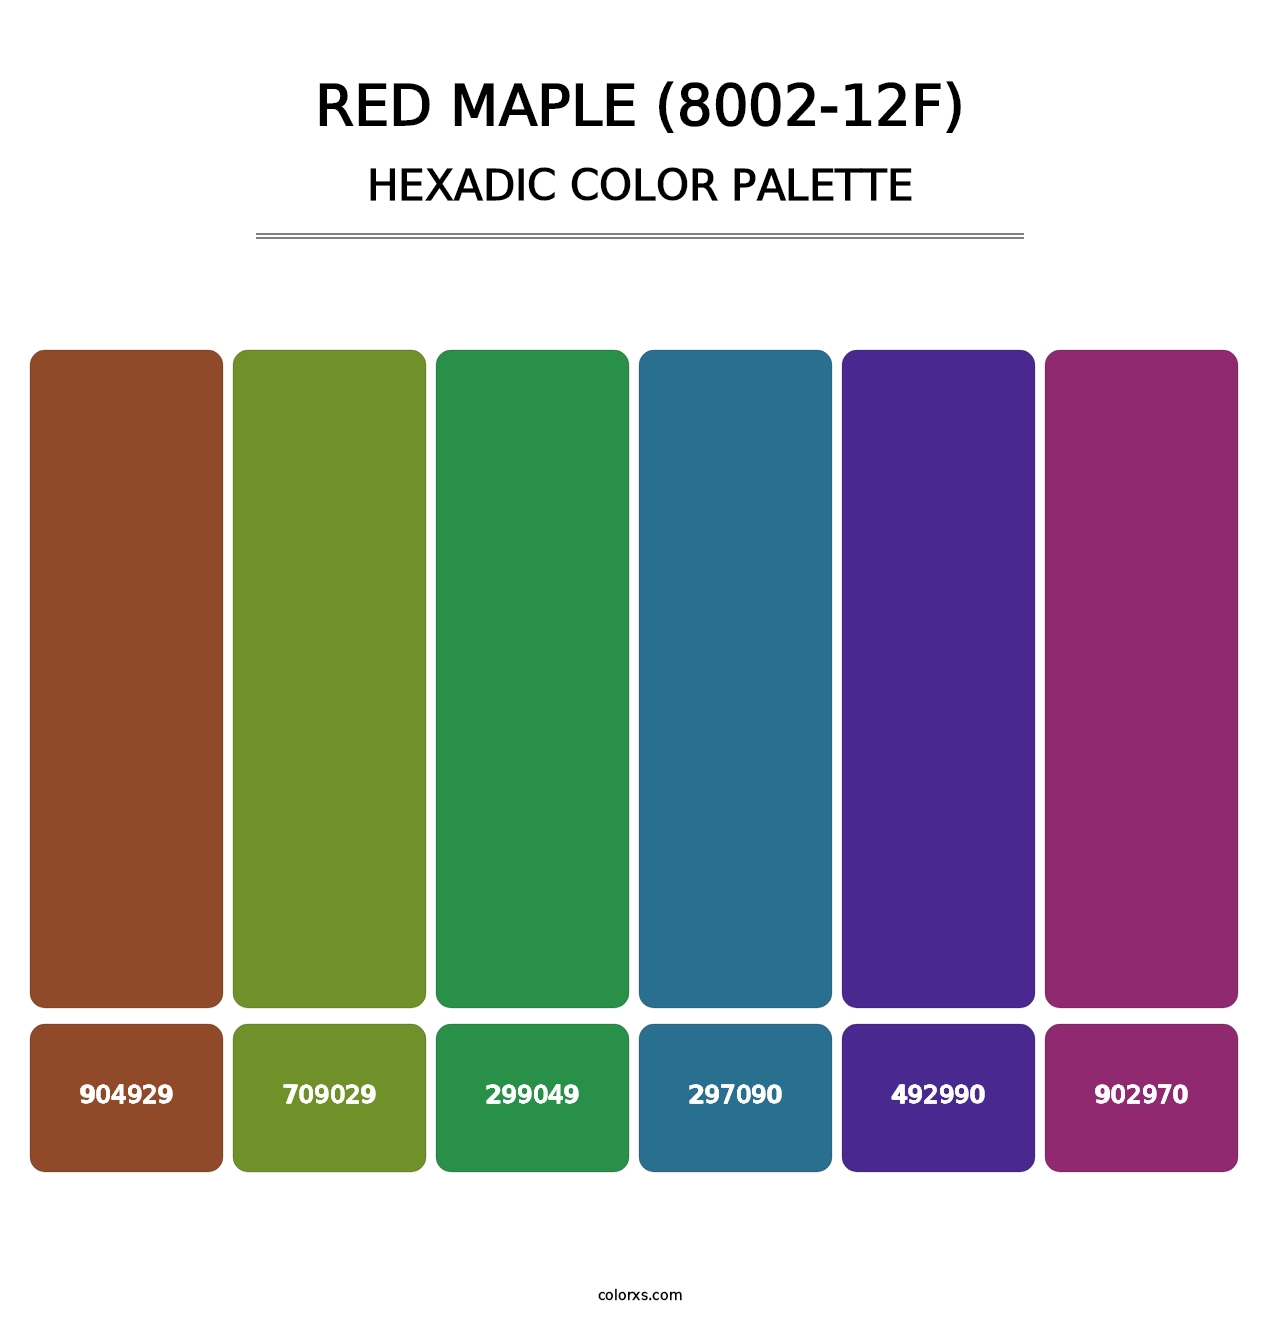 Red Maple (8002-12F) - Hexadic Color Palette